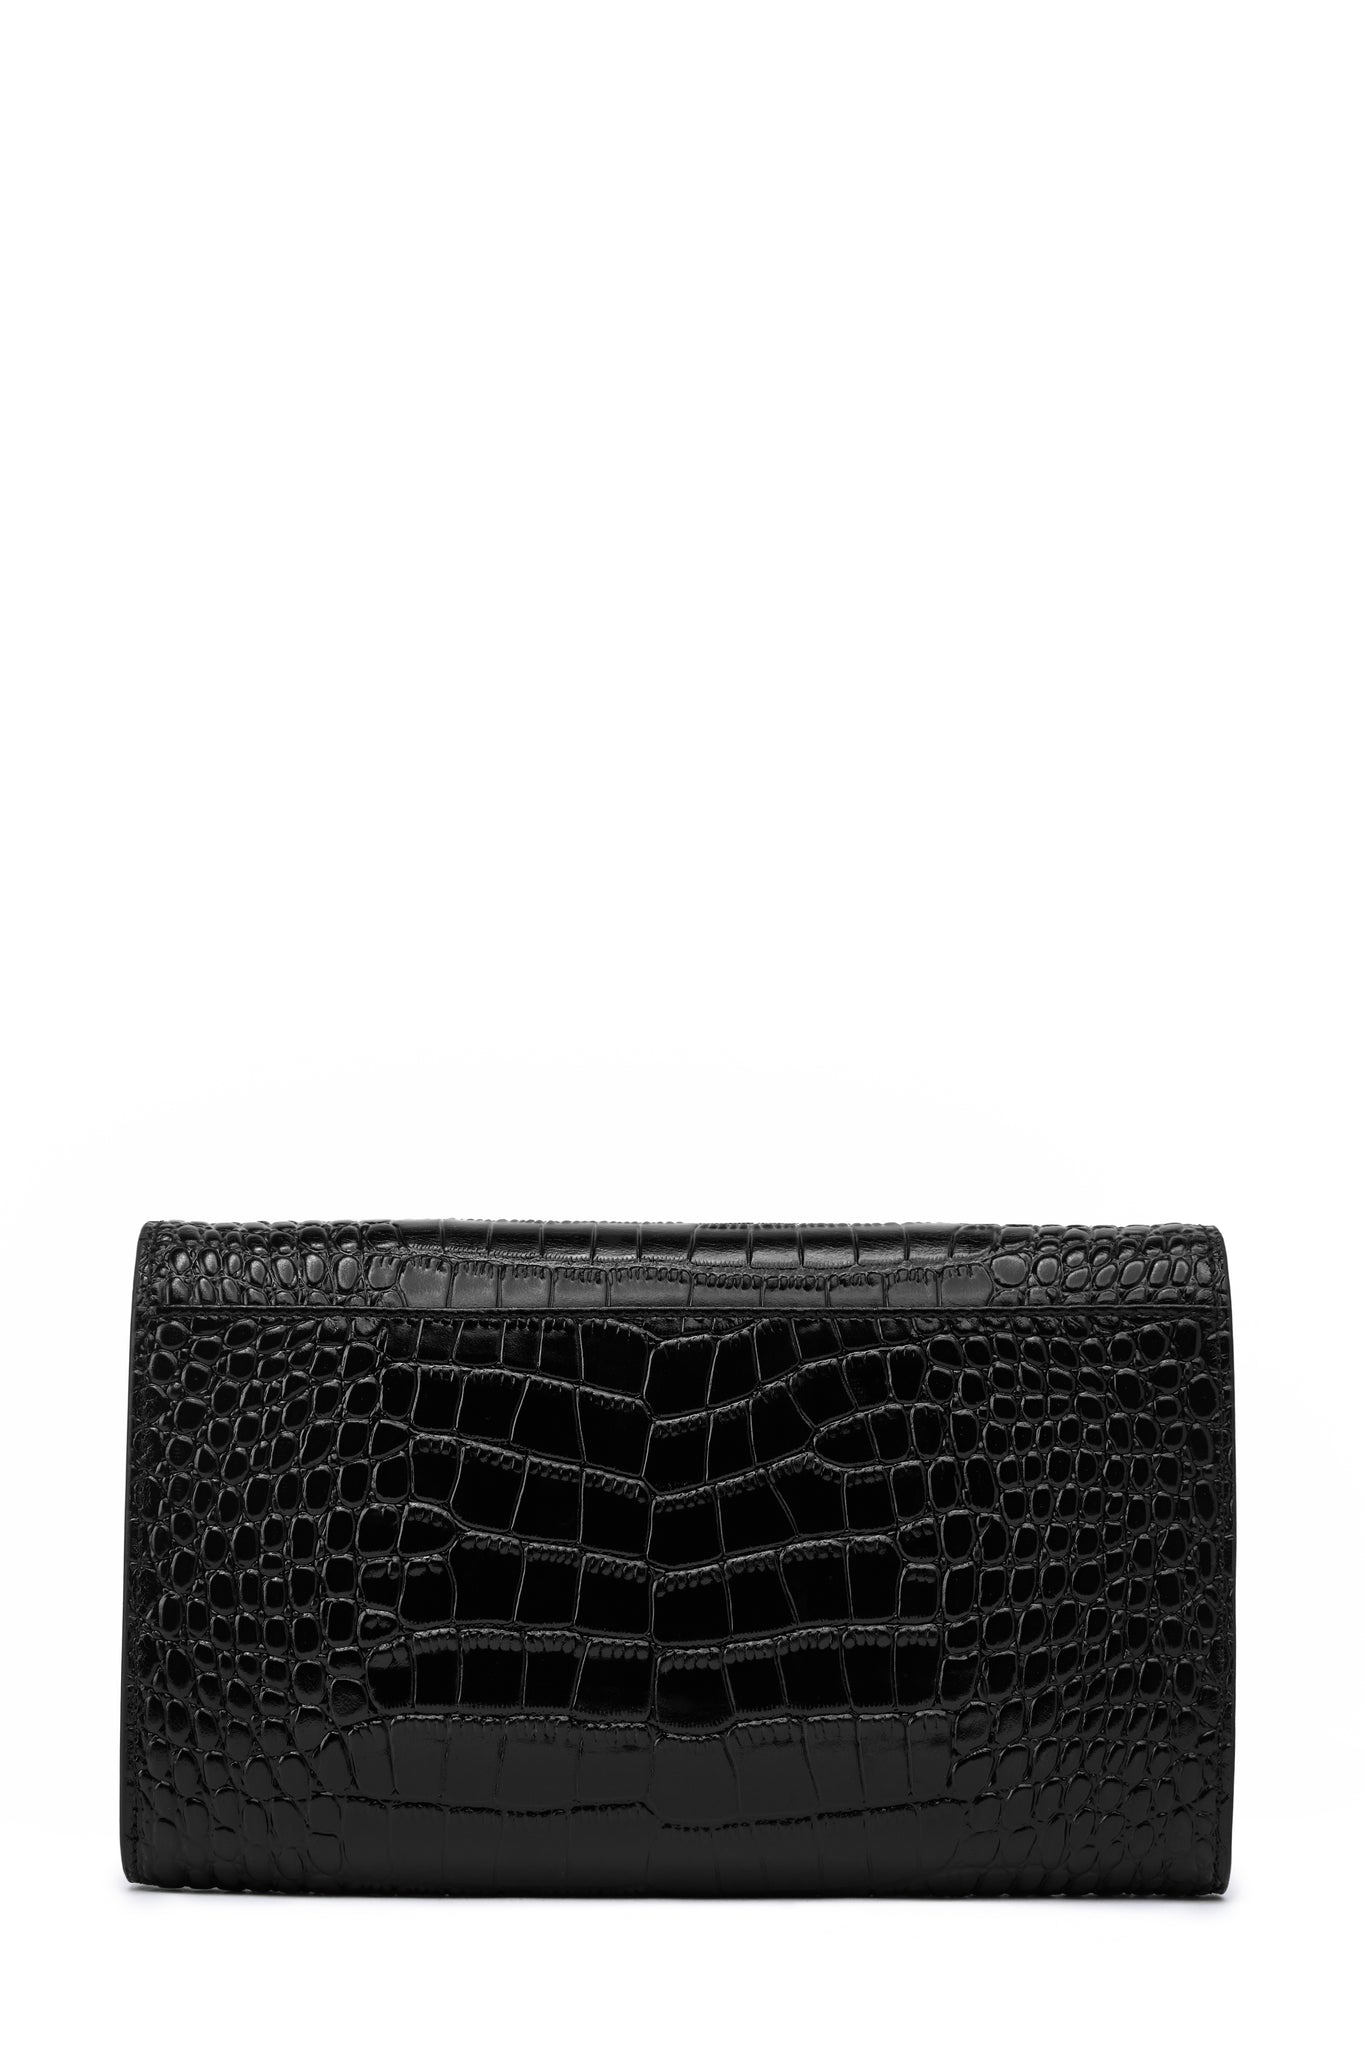 back of womens black croc embossed leather clutch bag with silver hardware